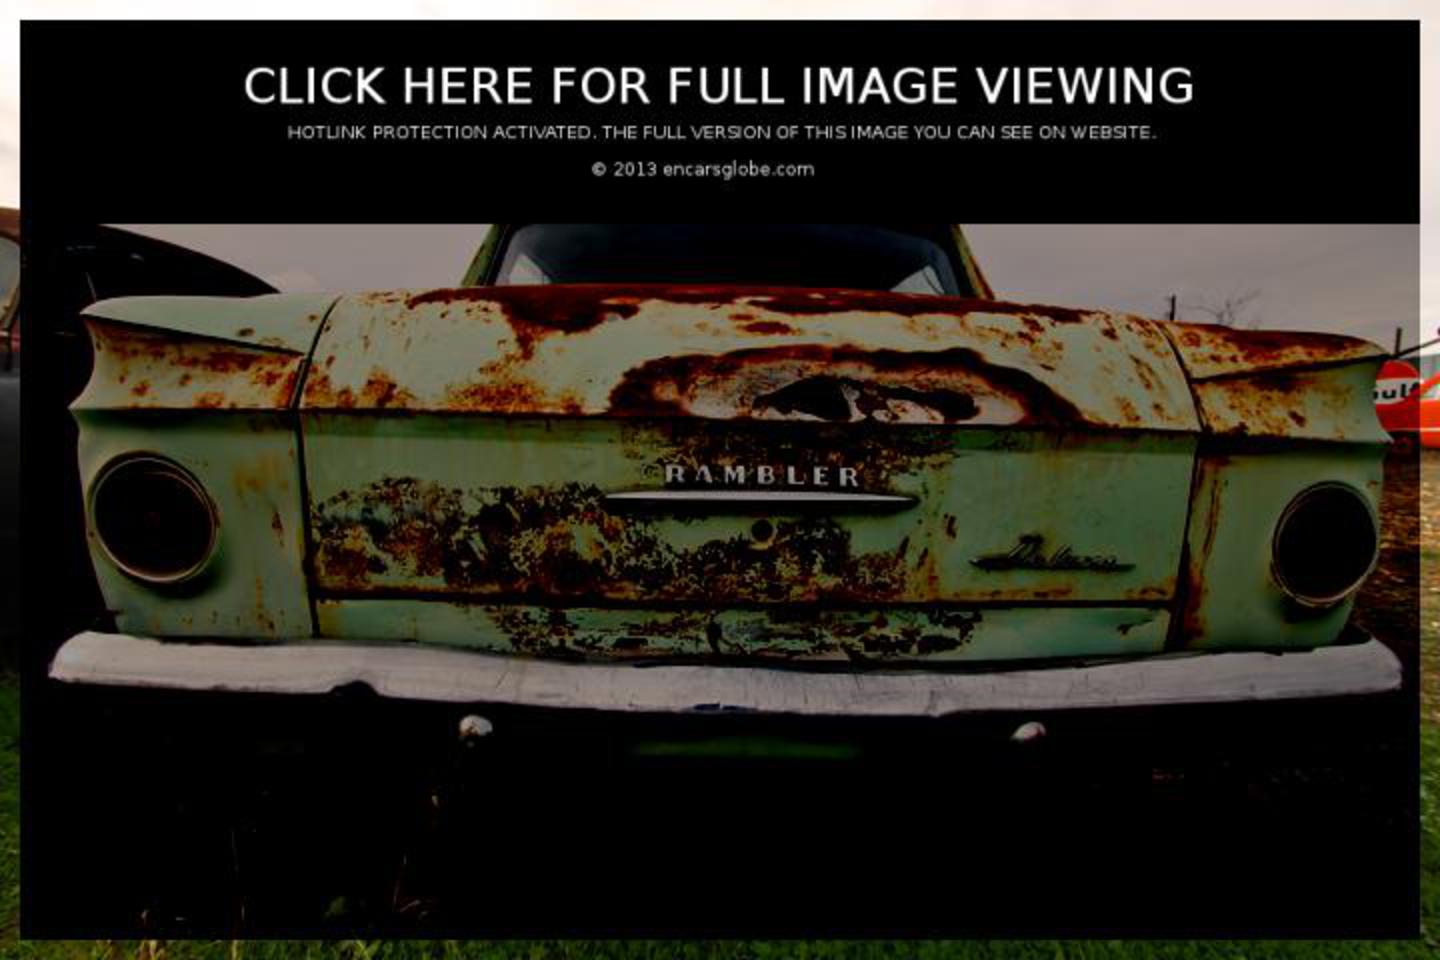 Rambler American 220 4dr Photo Gallery: Photo #12 out of 10, Image ...